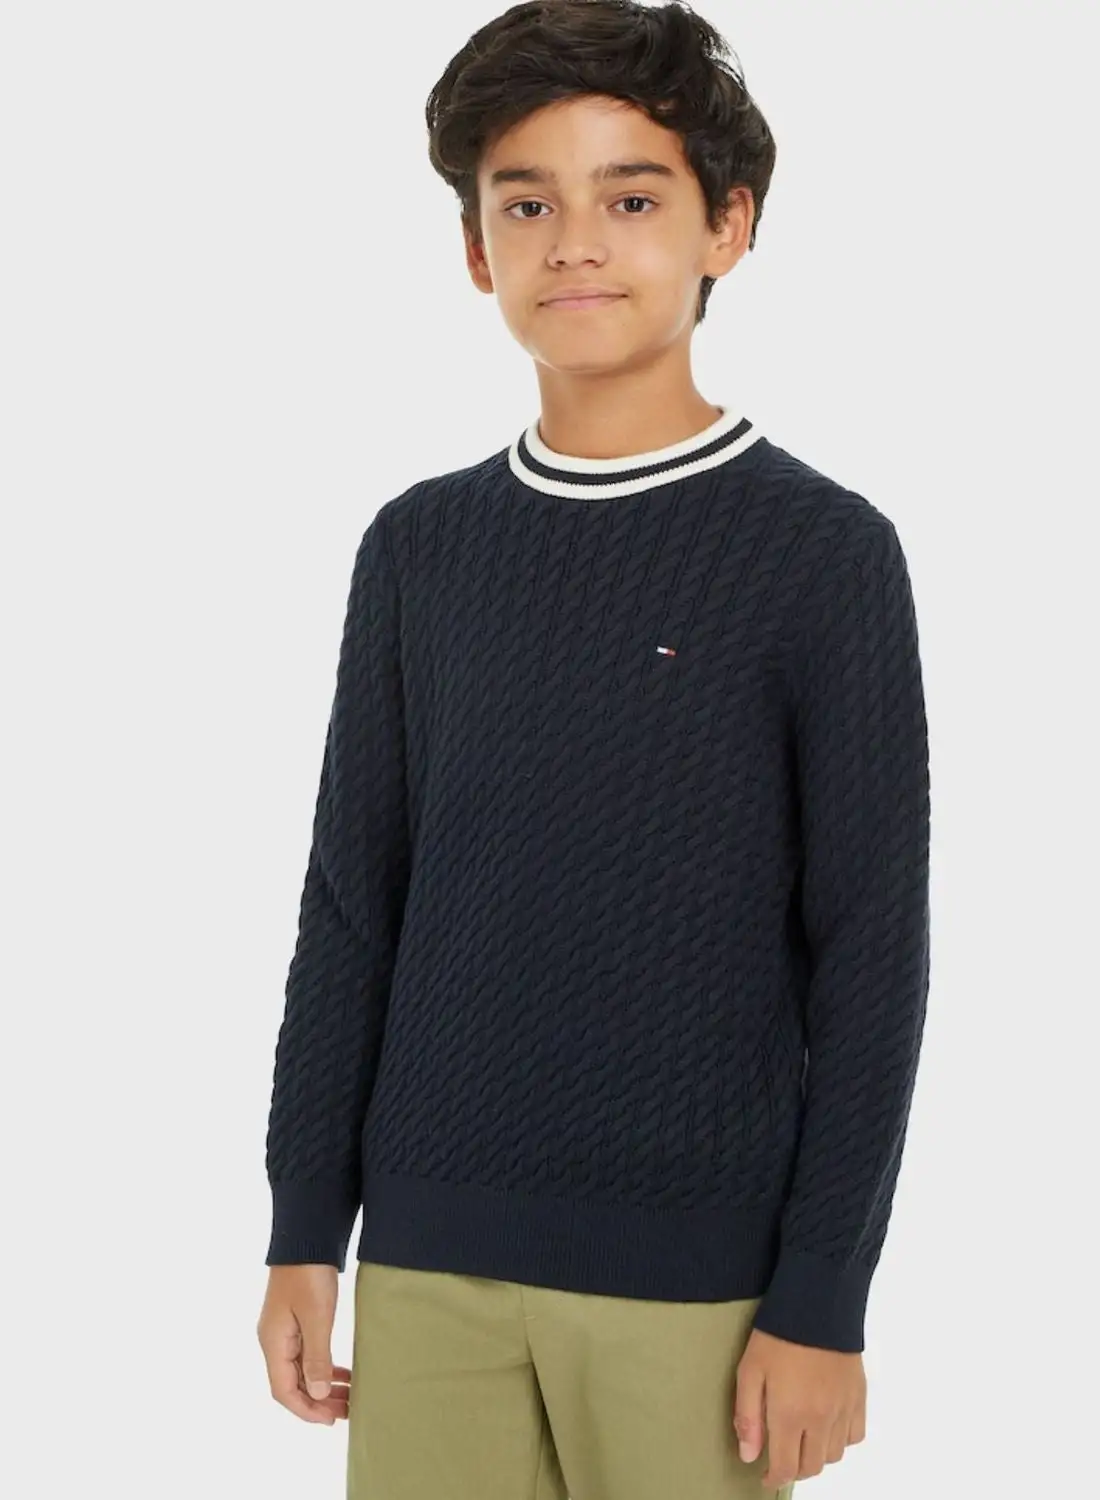 TOMMY HILFIGER Kids Knitted Sweater